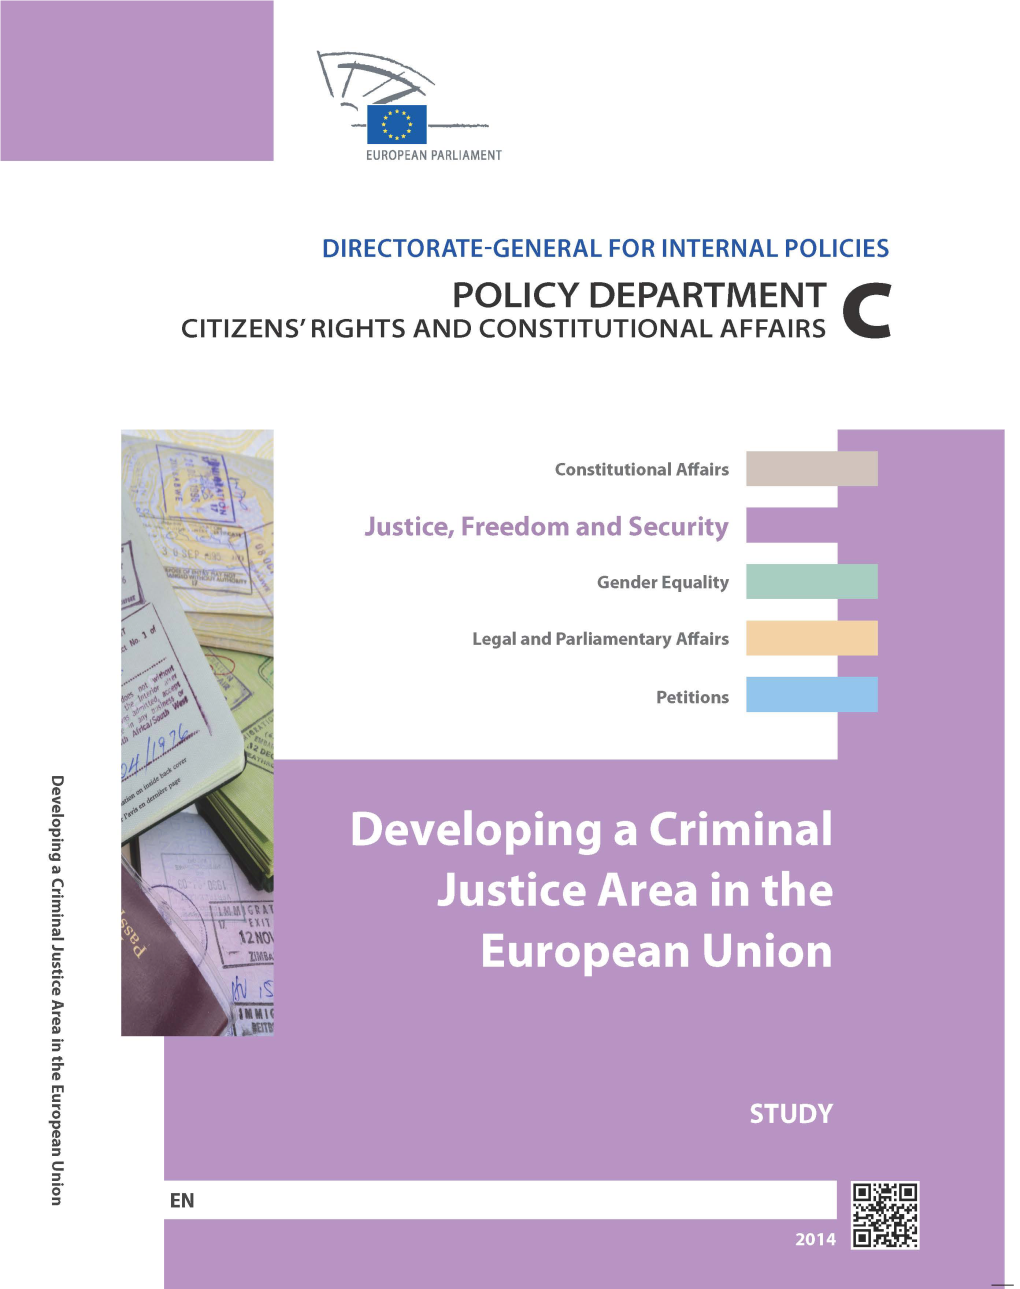 Developing a Criminal Justice Area in the European Union